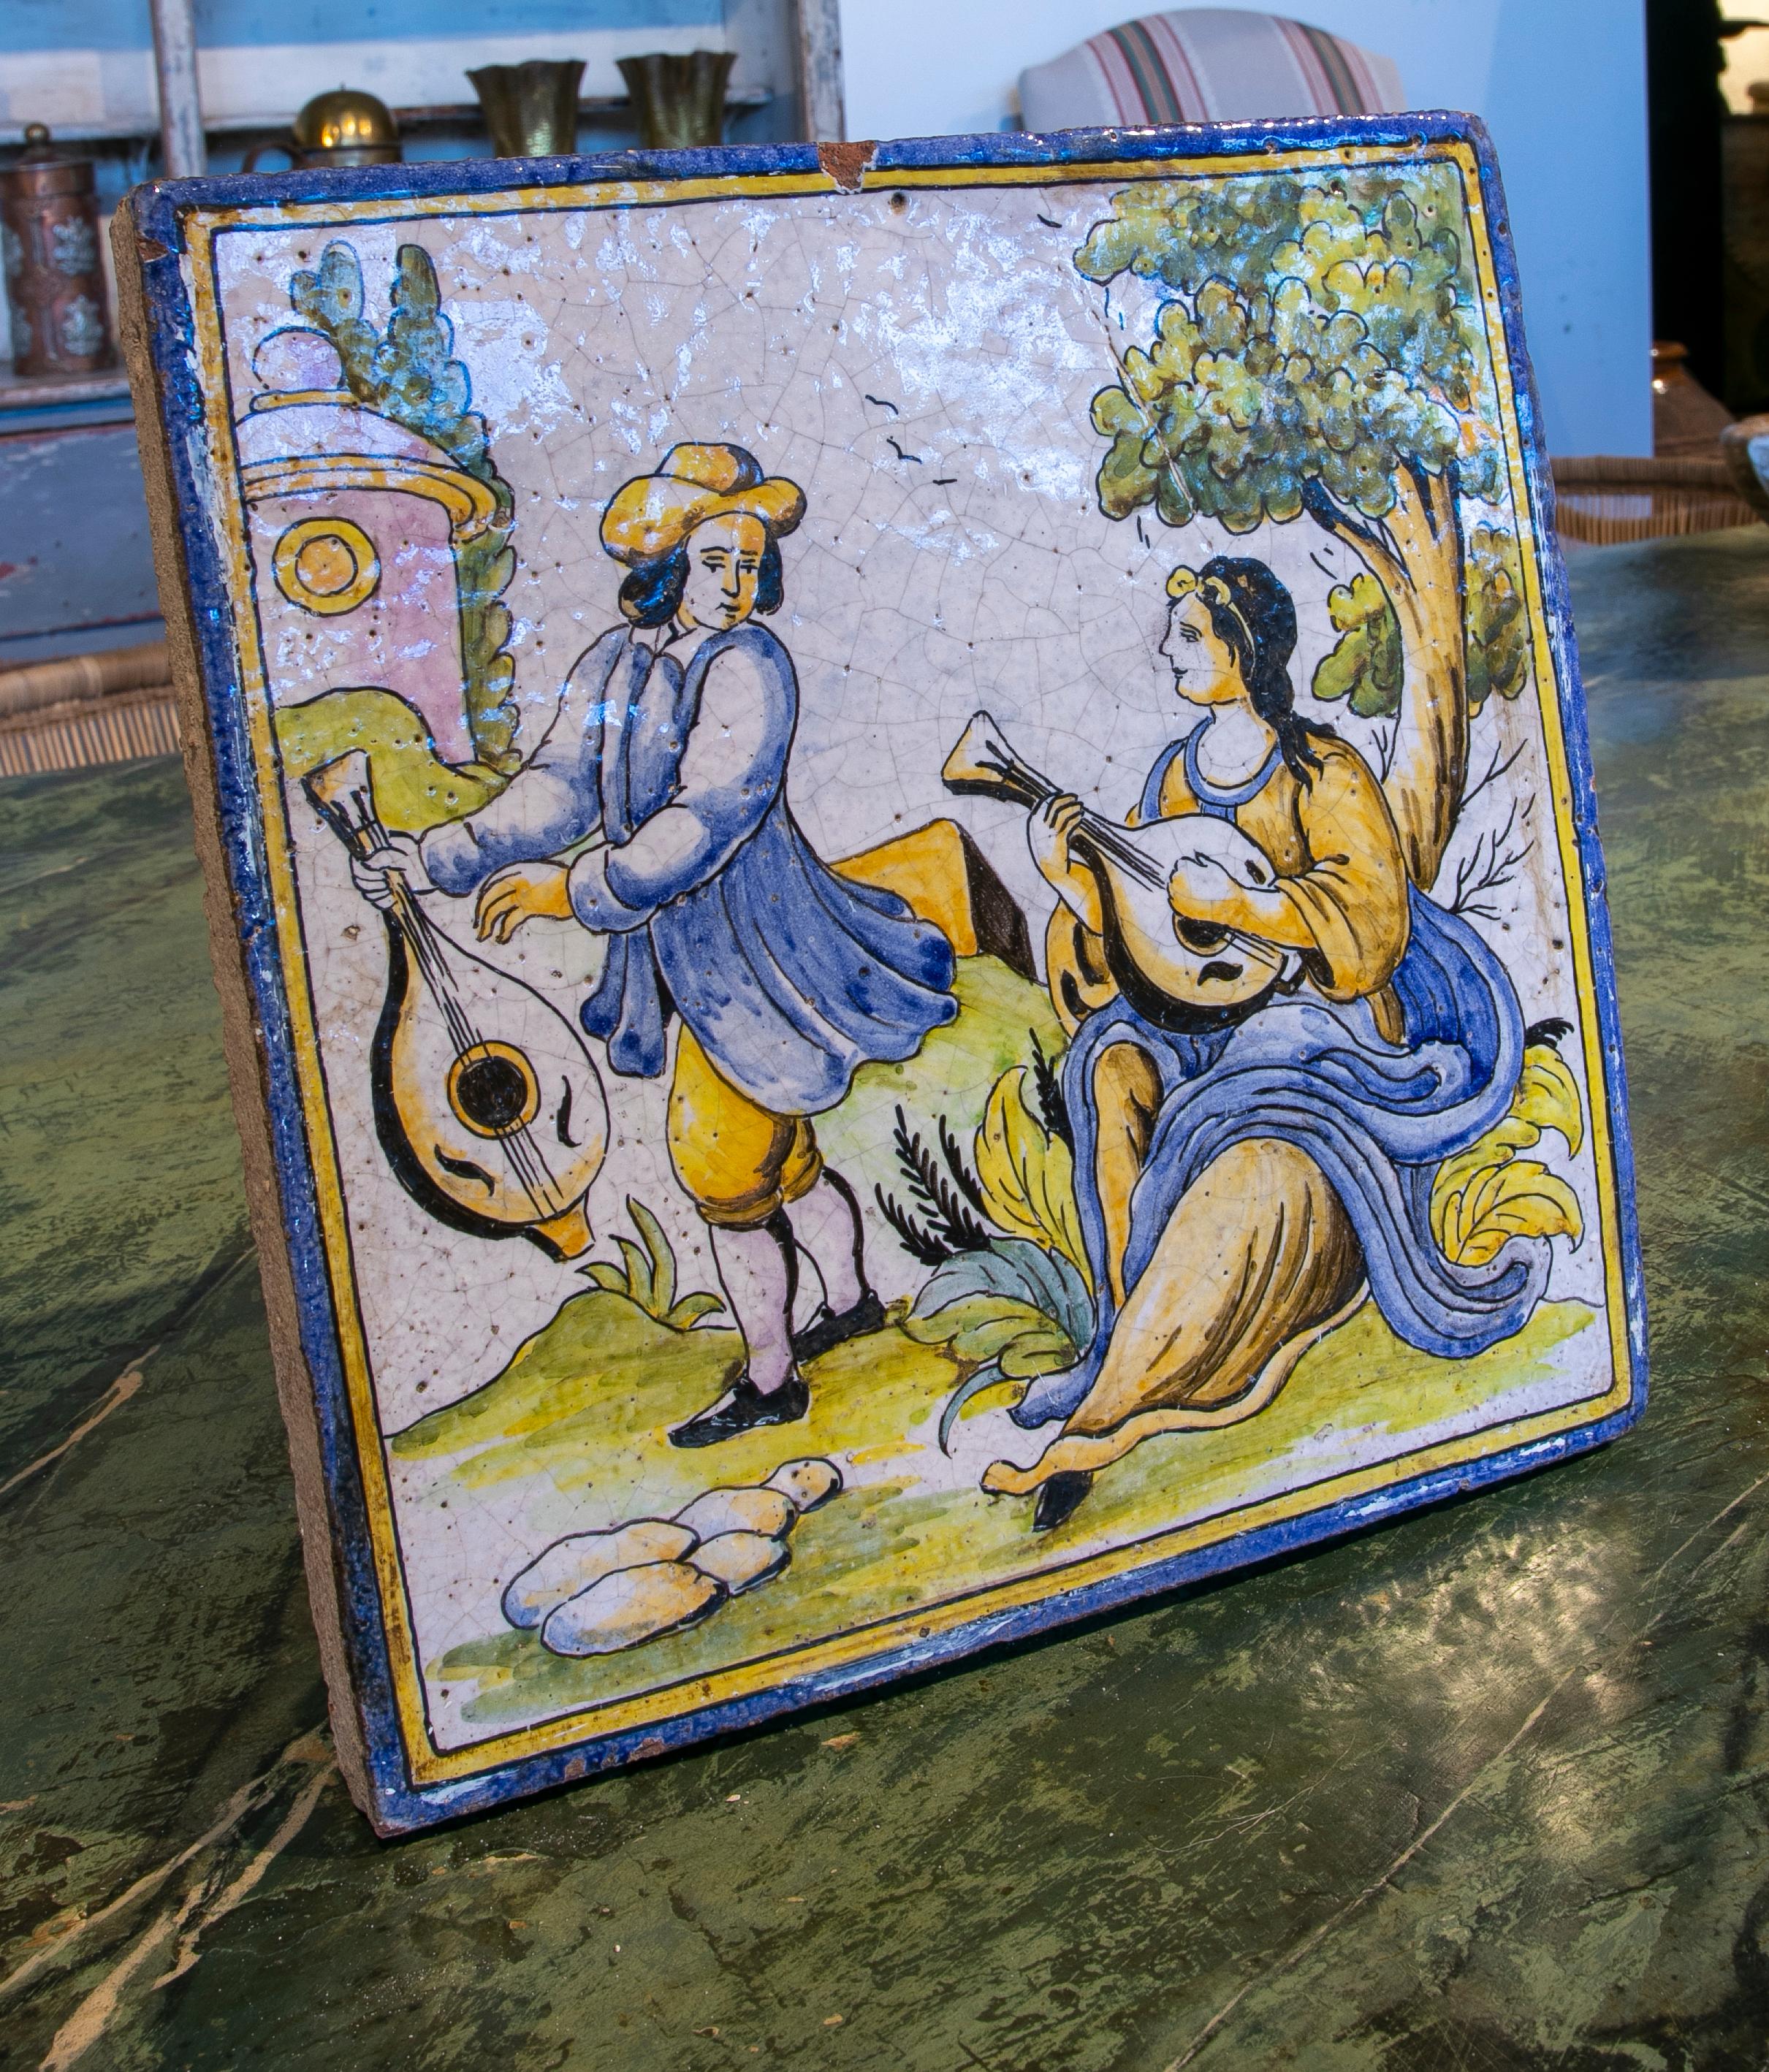 1970s Spanish Hand Painted Glazed ceramic tile with People Scene.